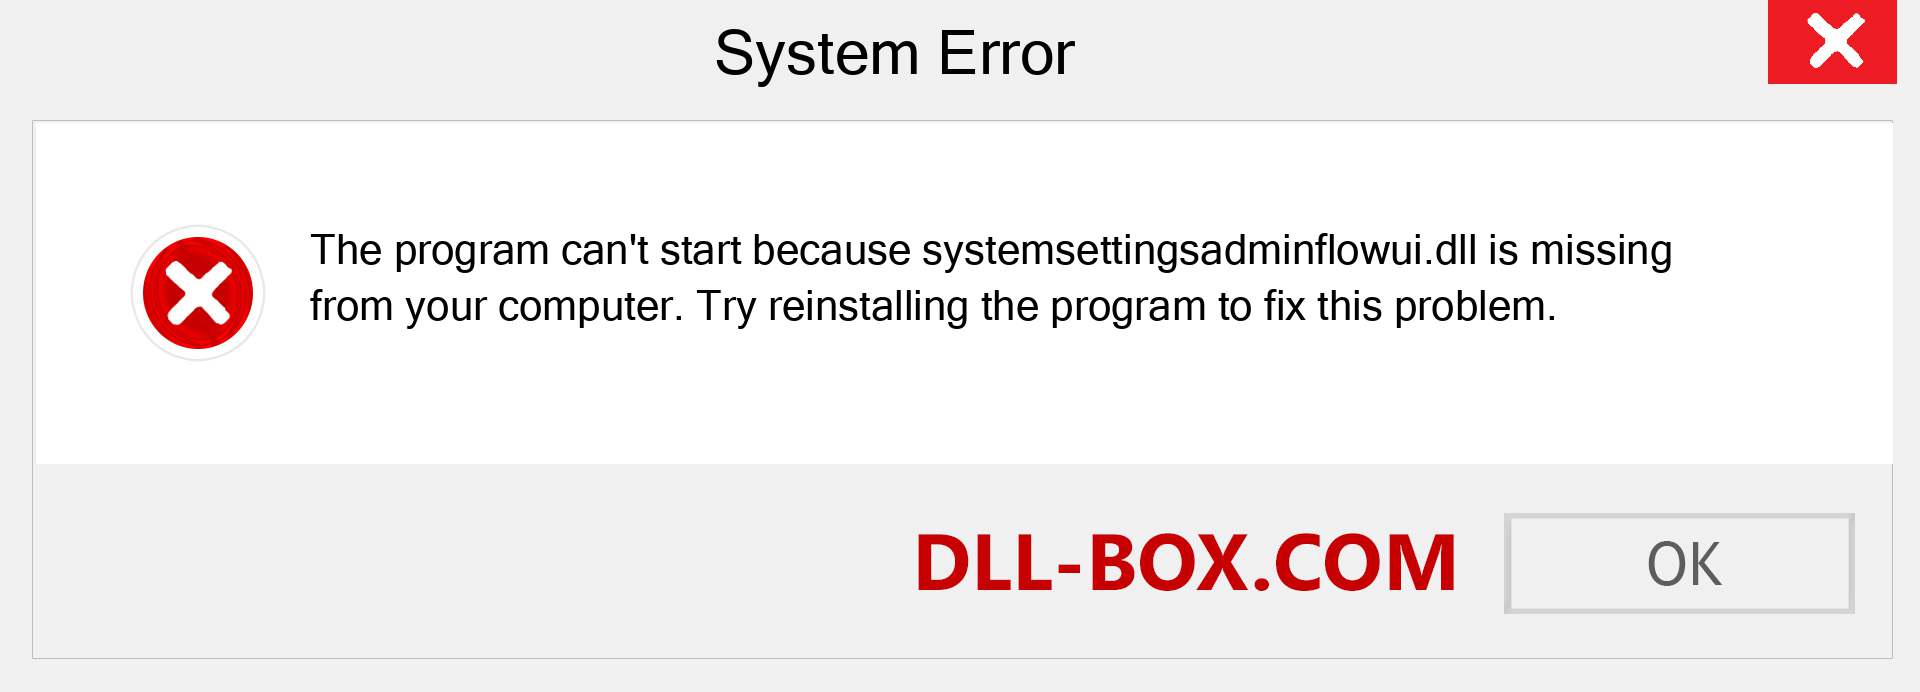  systemsettingsadminflowui.dll file is missing?. Download for Windows 7, 8, 10 - Fix  systemsettingsadminflowui dll Missing Error on Windows, photos, images